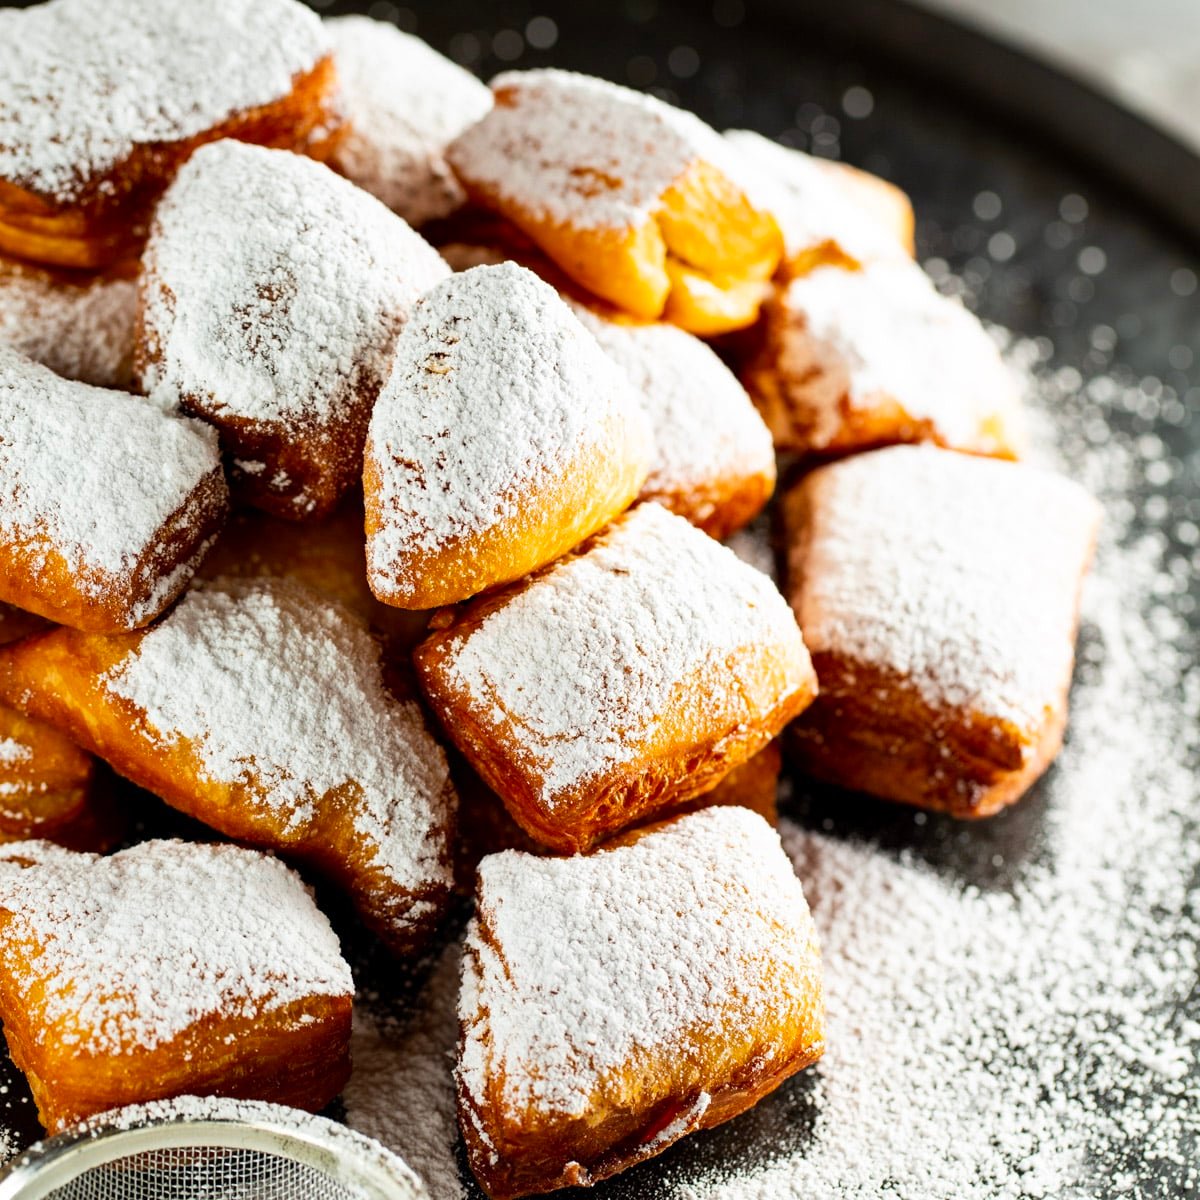 Homemade Beignets covered in powdered sugar.